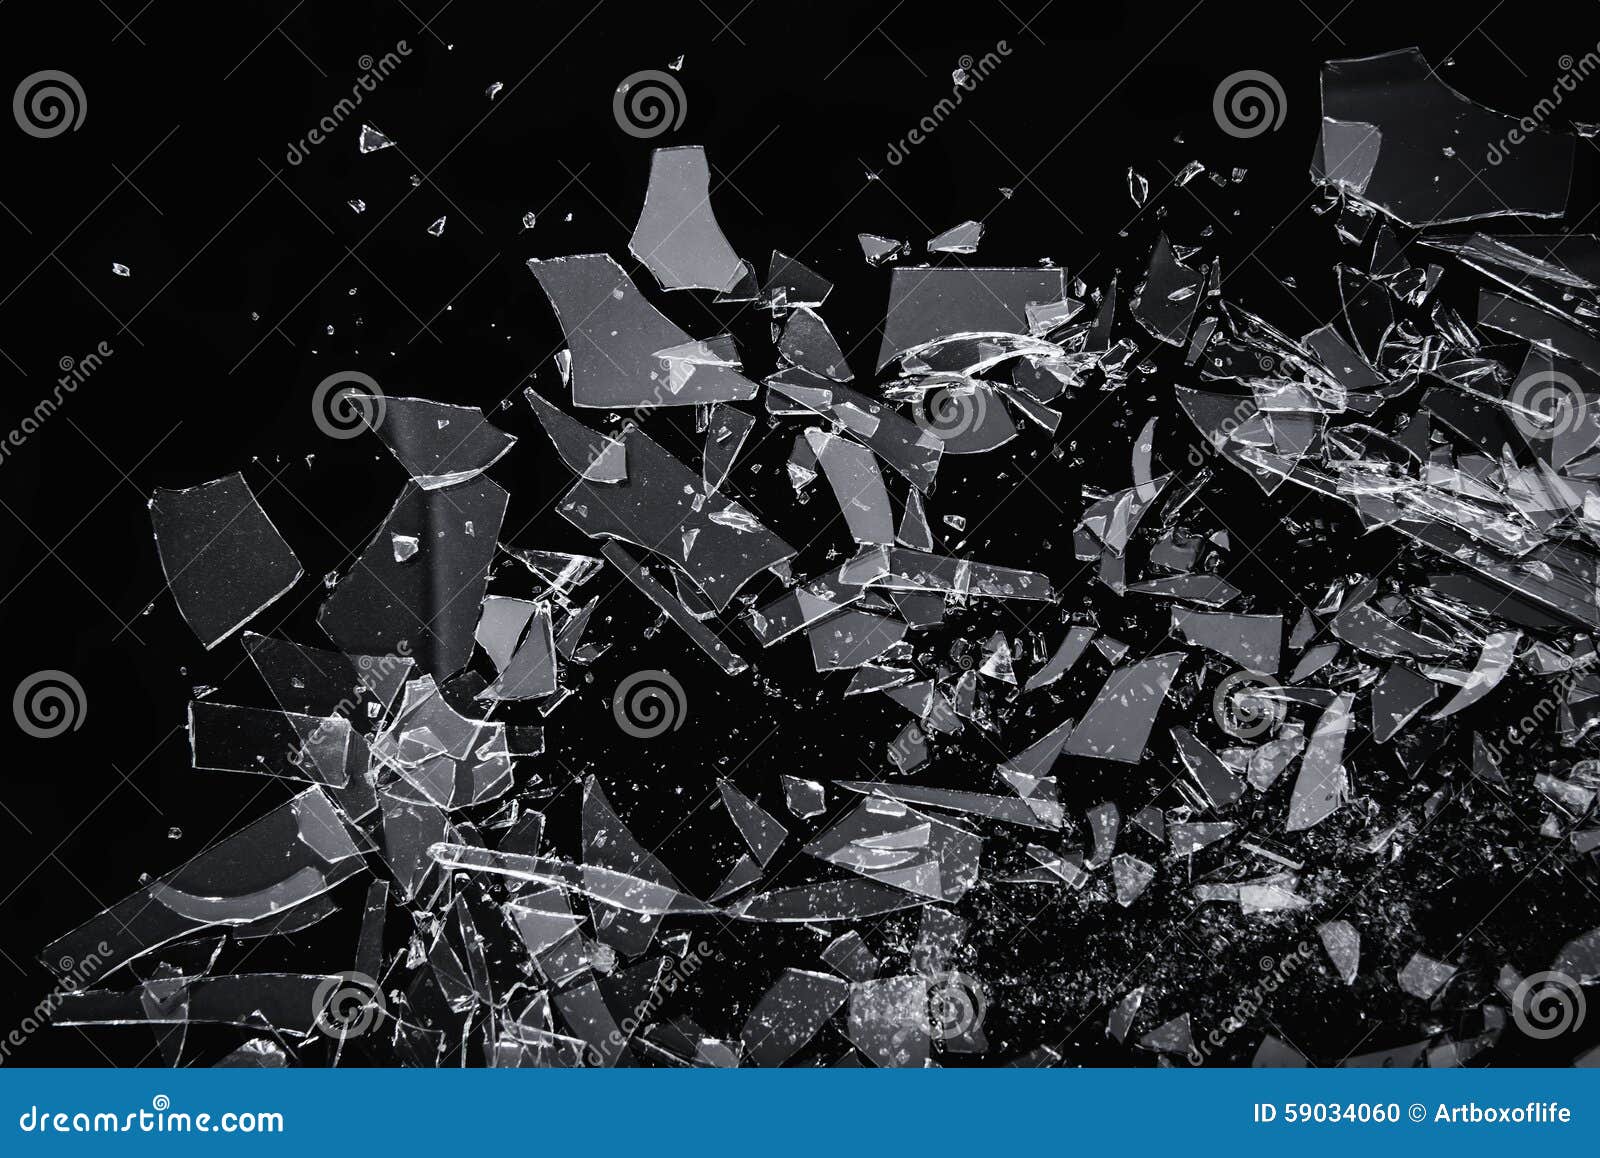 Broken Clear Glass Pieces on Black Surface · Free Stock Photo